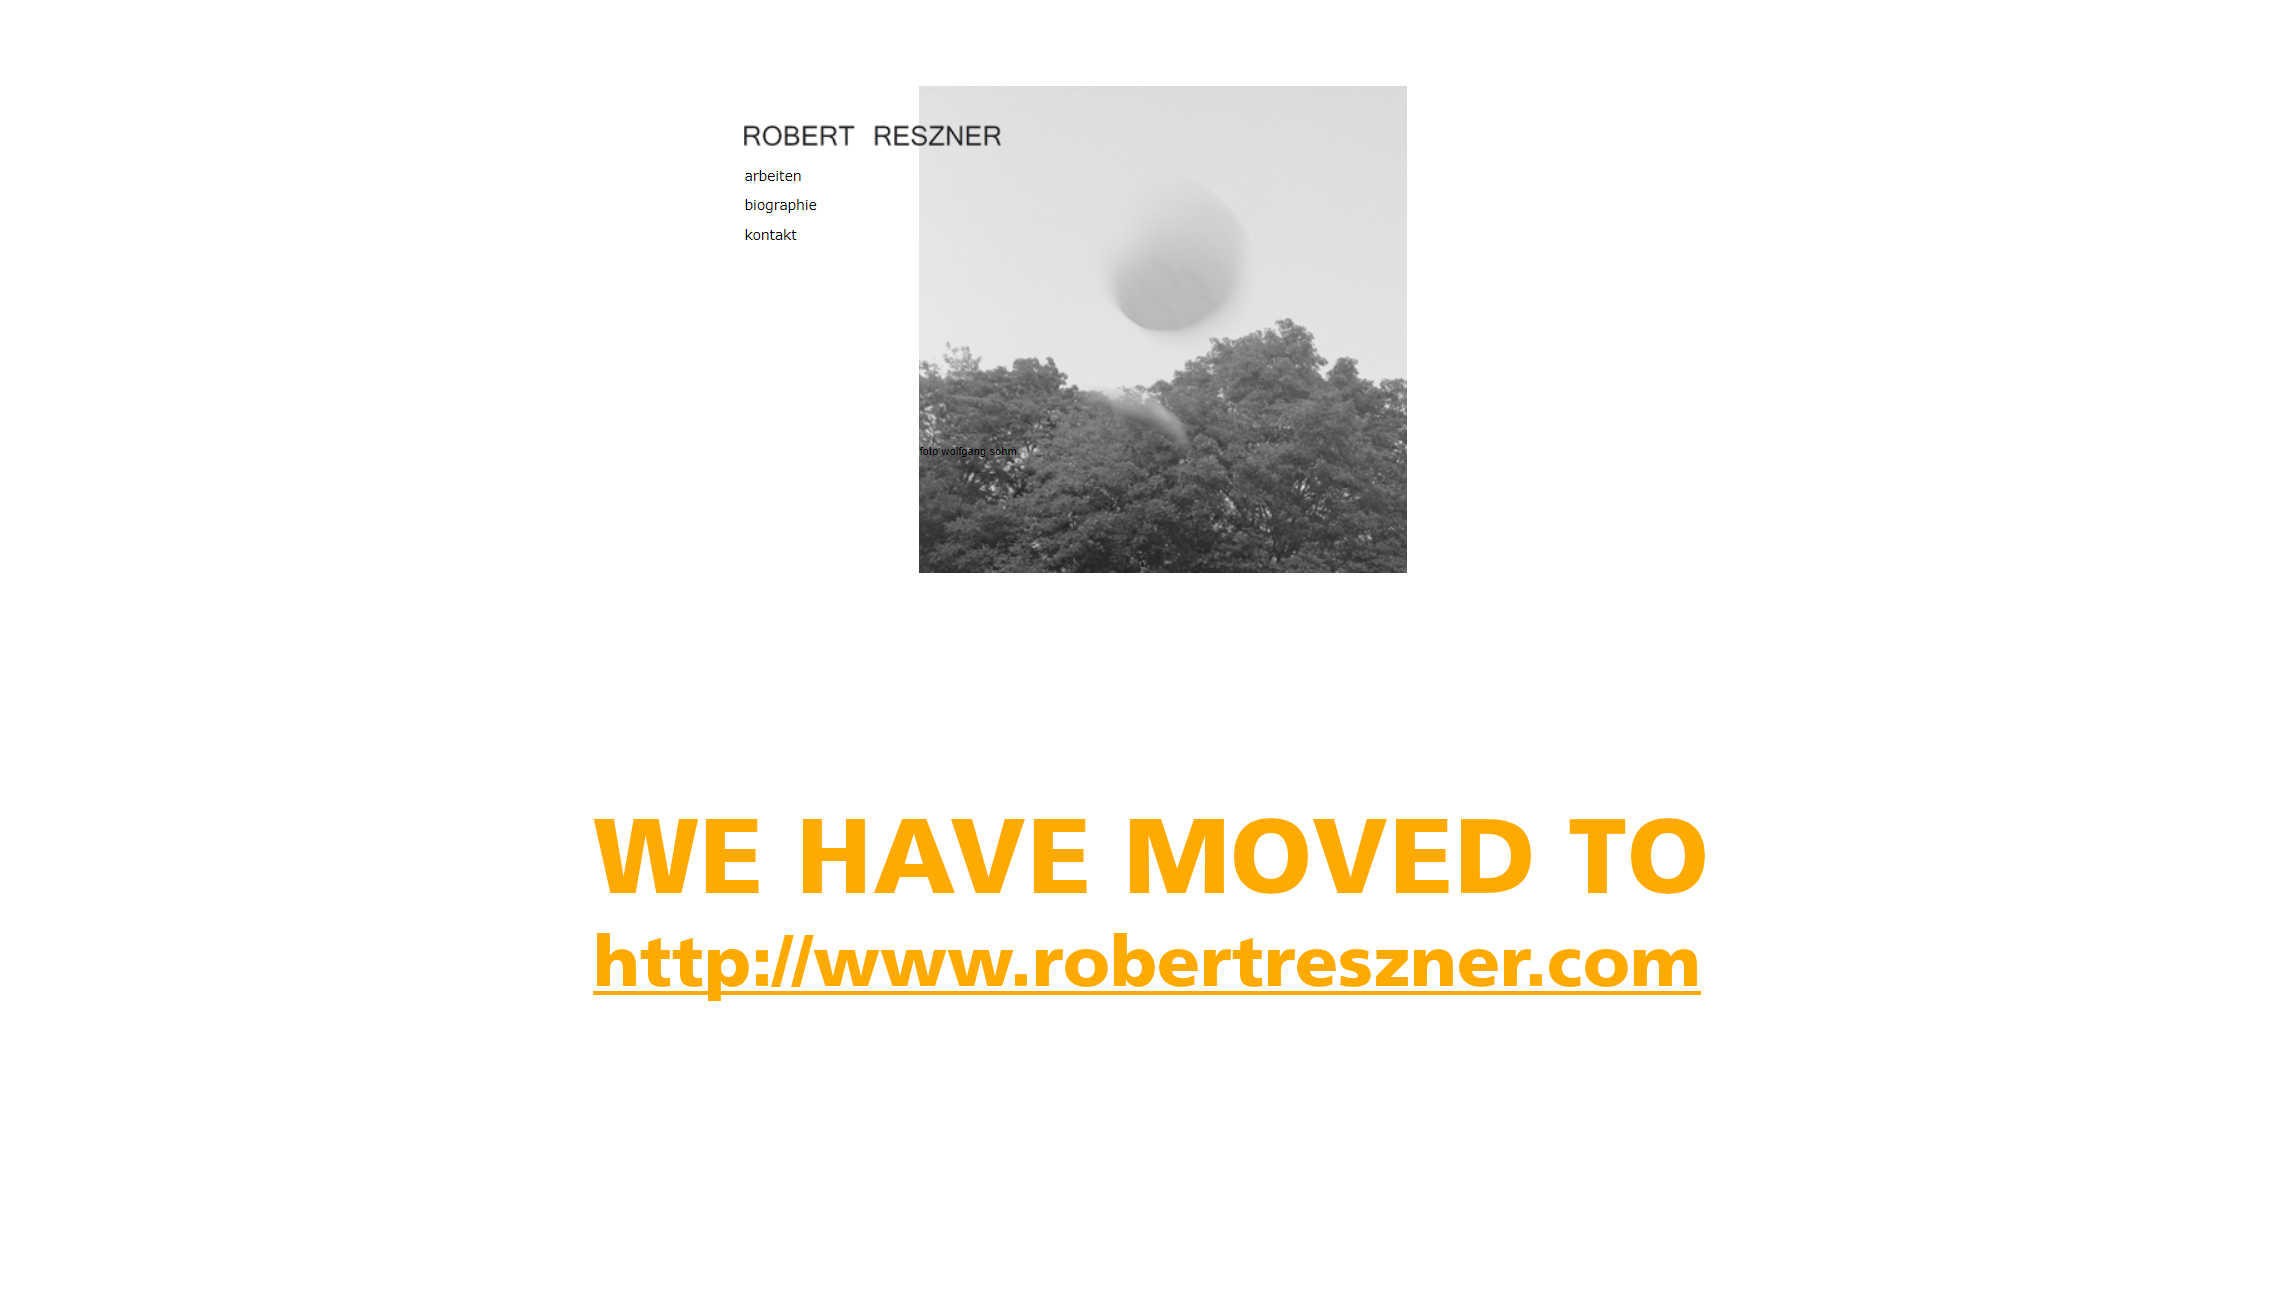 We have moved to http://www.robertreszner.com